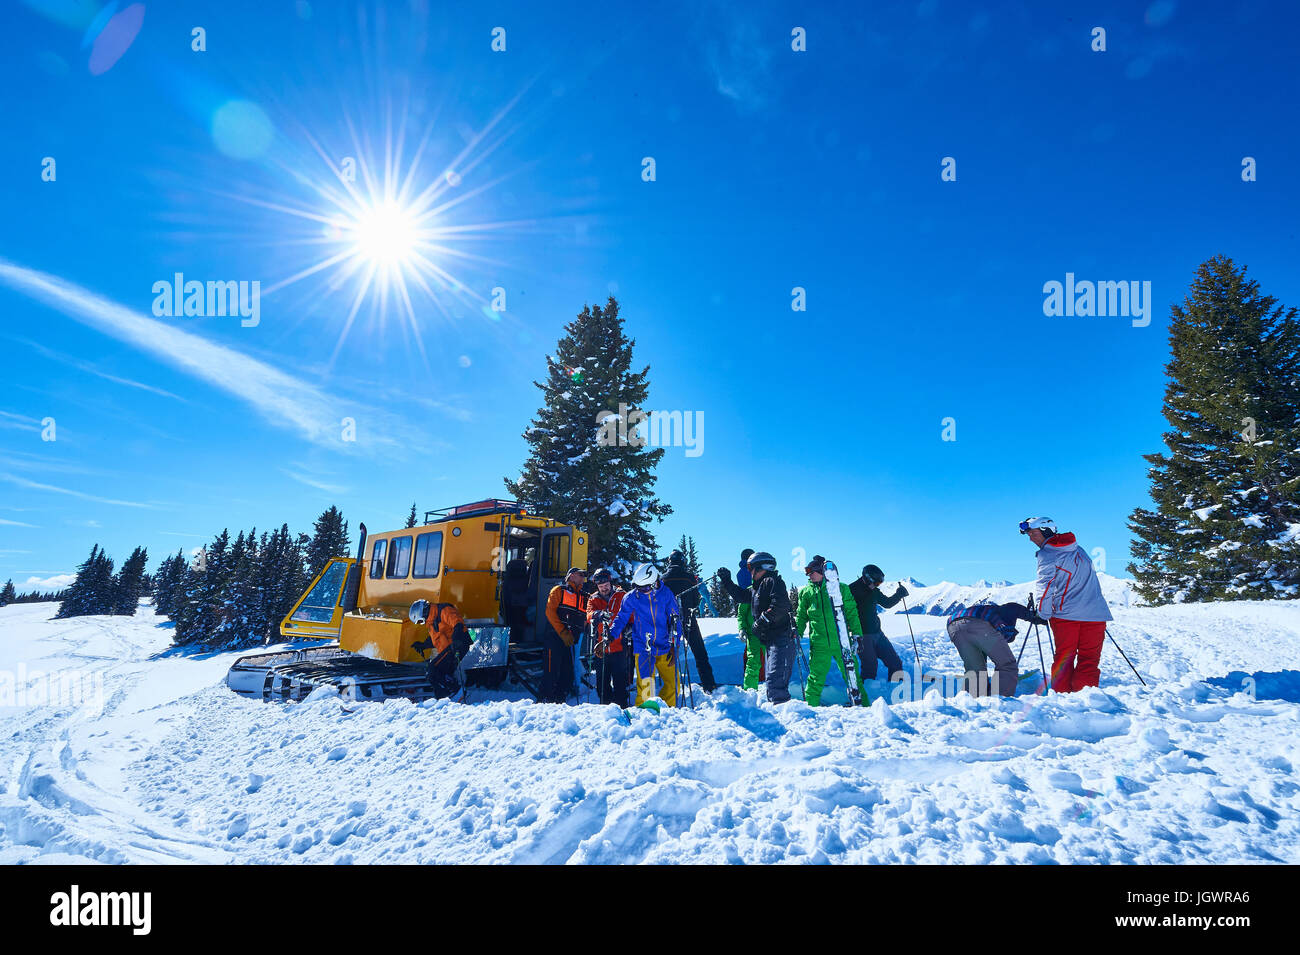 Male and female skiers on ski slope by snow coach, Aspen, Colorado, USA Stock Photo